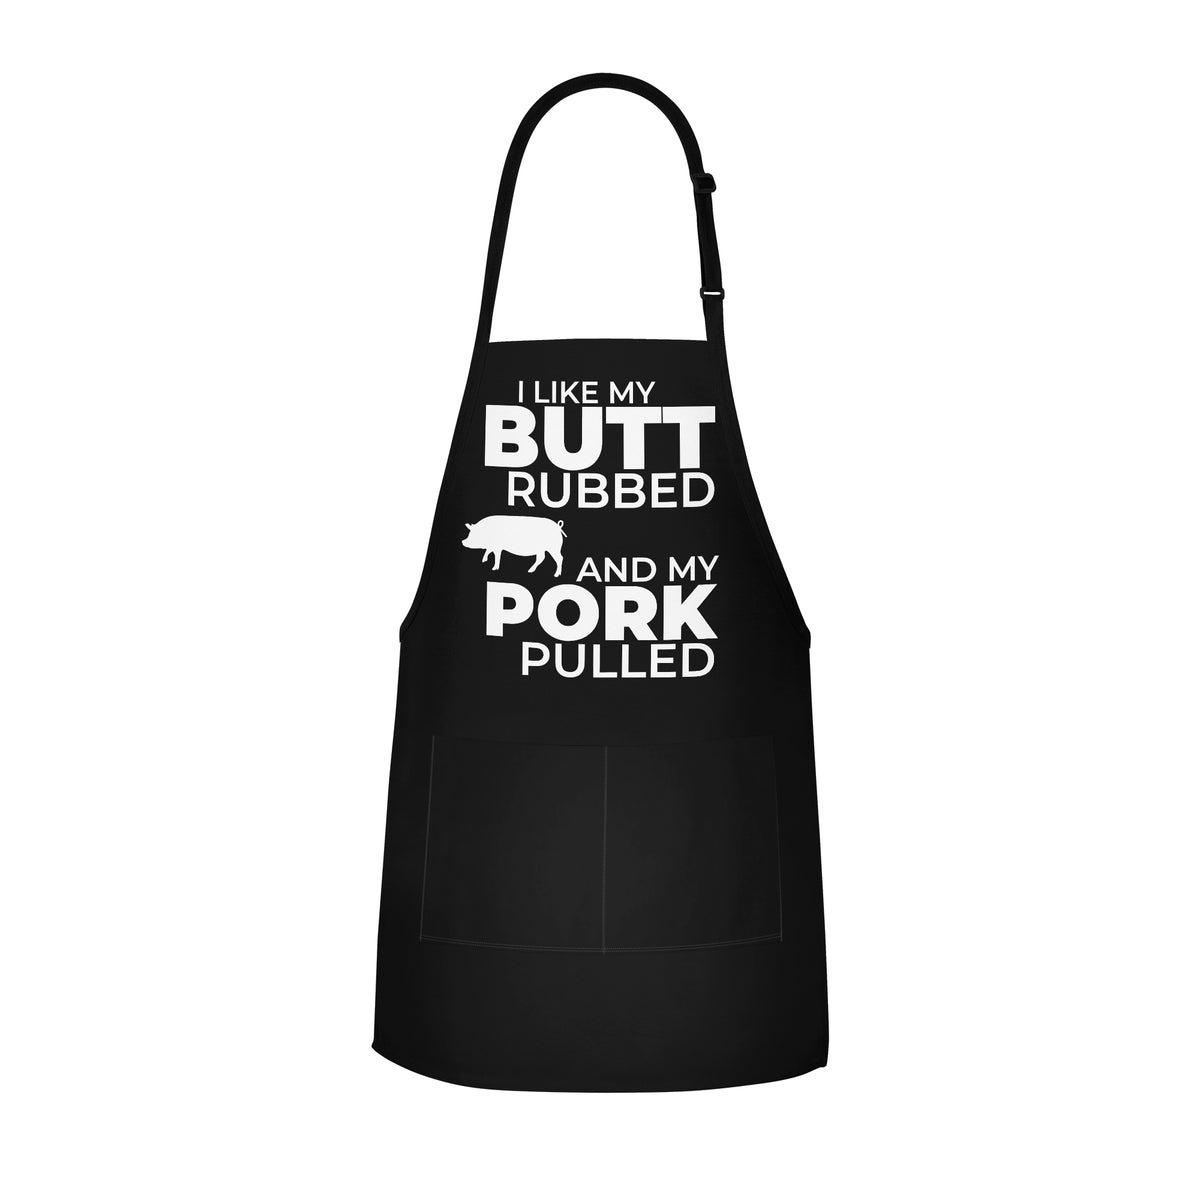  S - Pull The Pork T Shirt Funny Offensive Mens BBQ Tee with  Funny Saying Rub The Butt Apron Rude Slogan Novelty Adult Humor Gray :  Clothing, Shoes & Jewelry